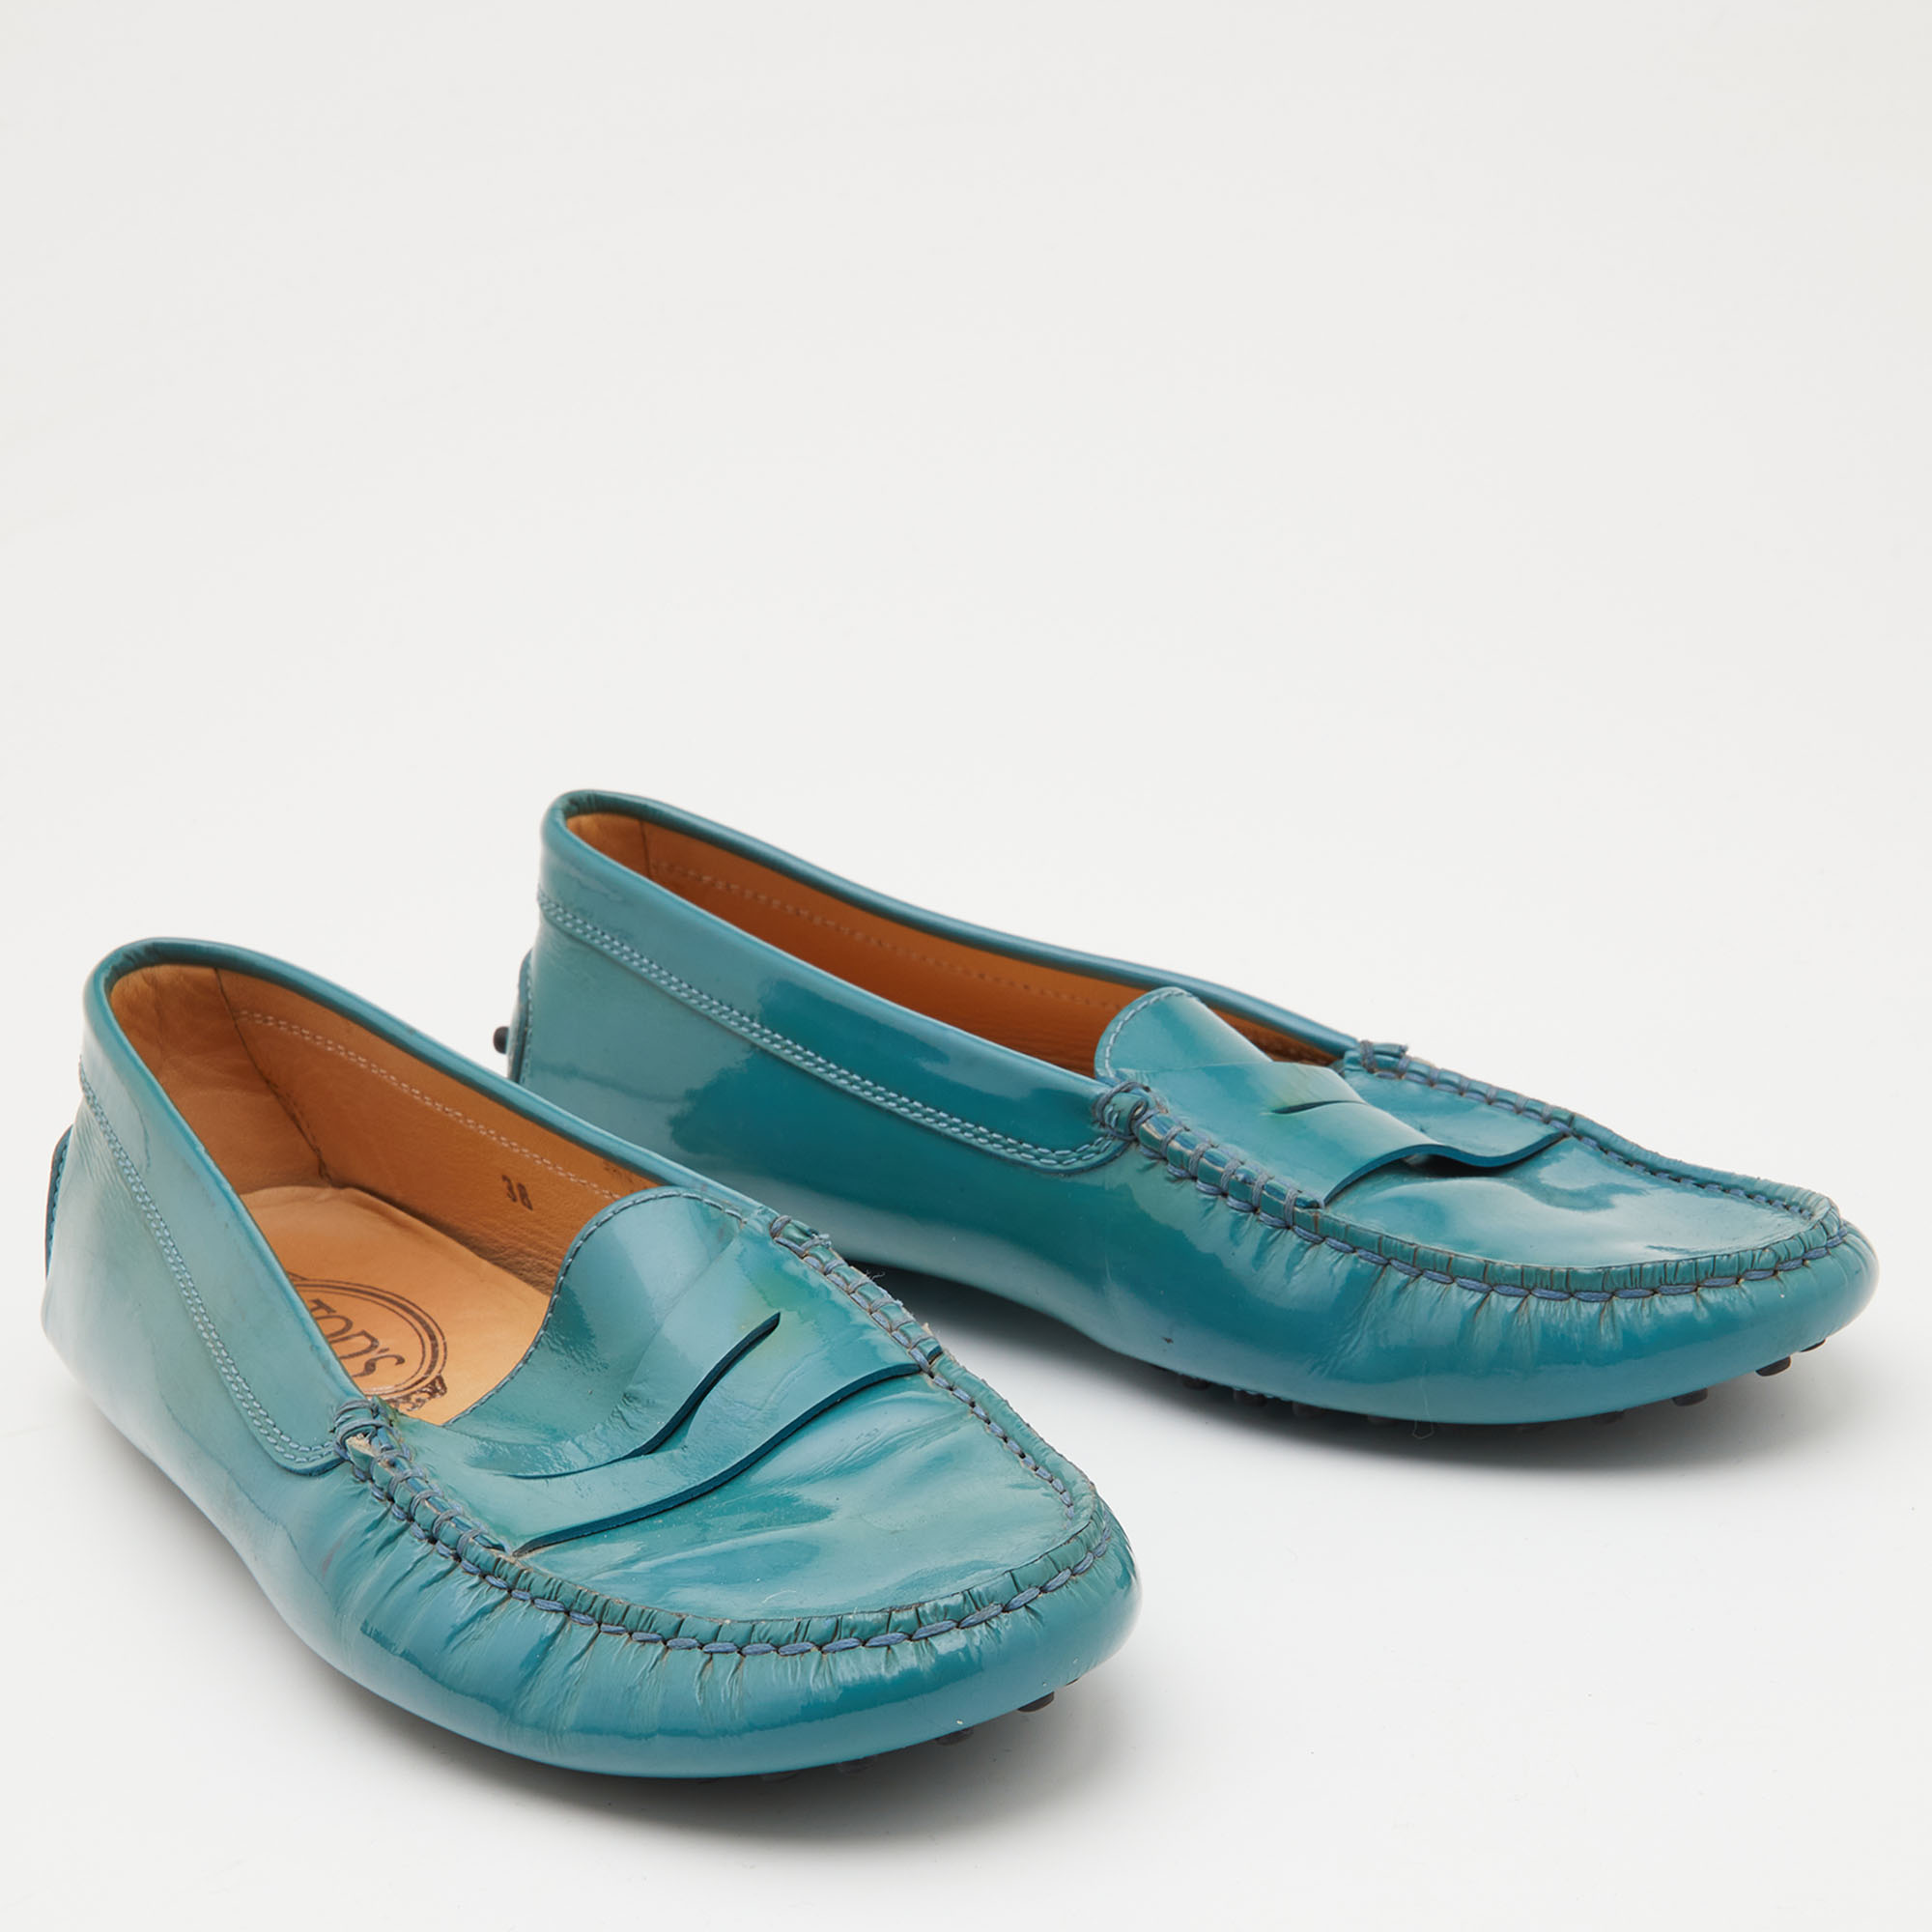 Tod's Teal Patent Leather Penny Loafers Size 38